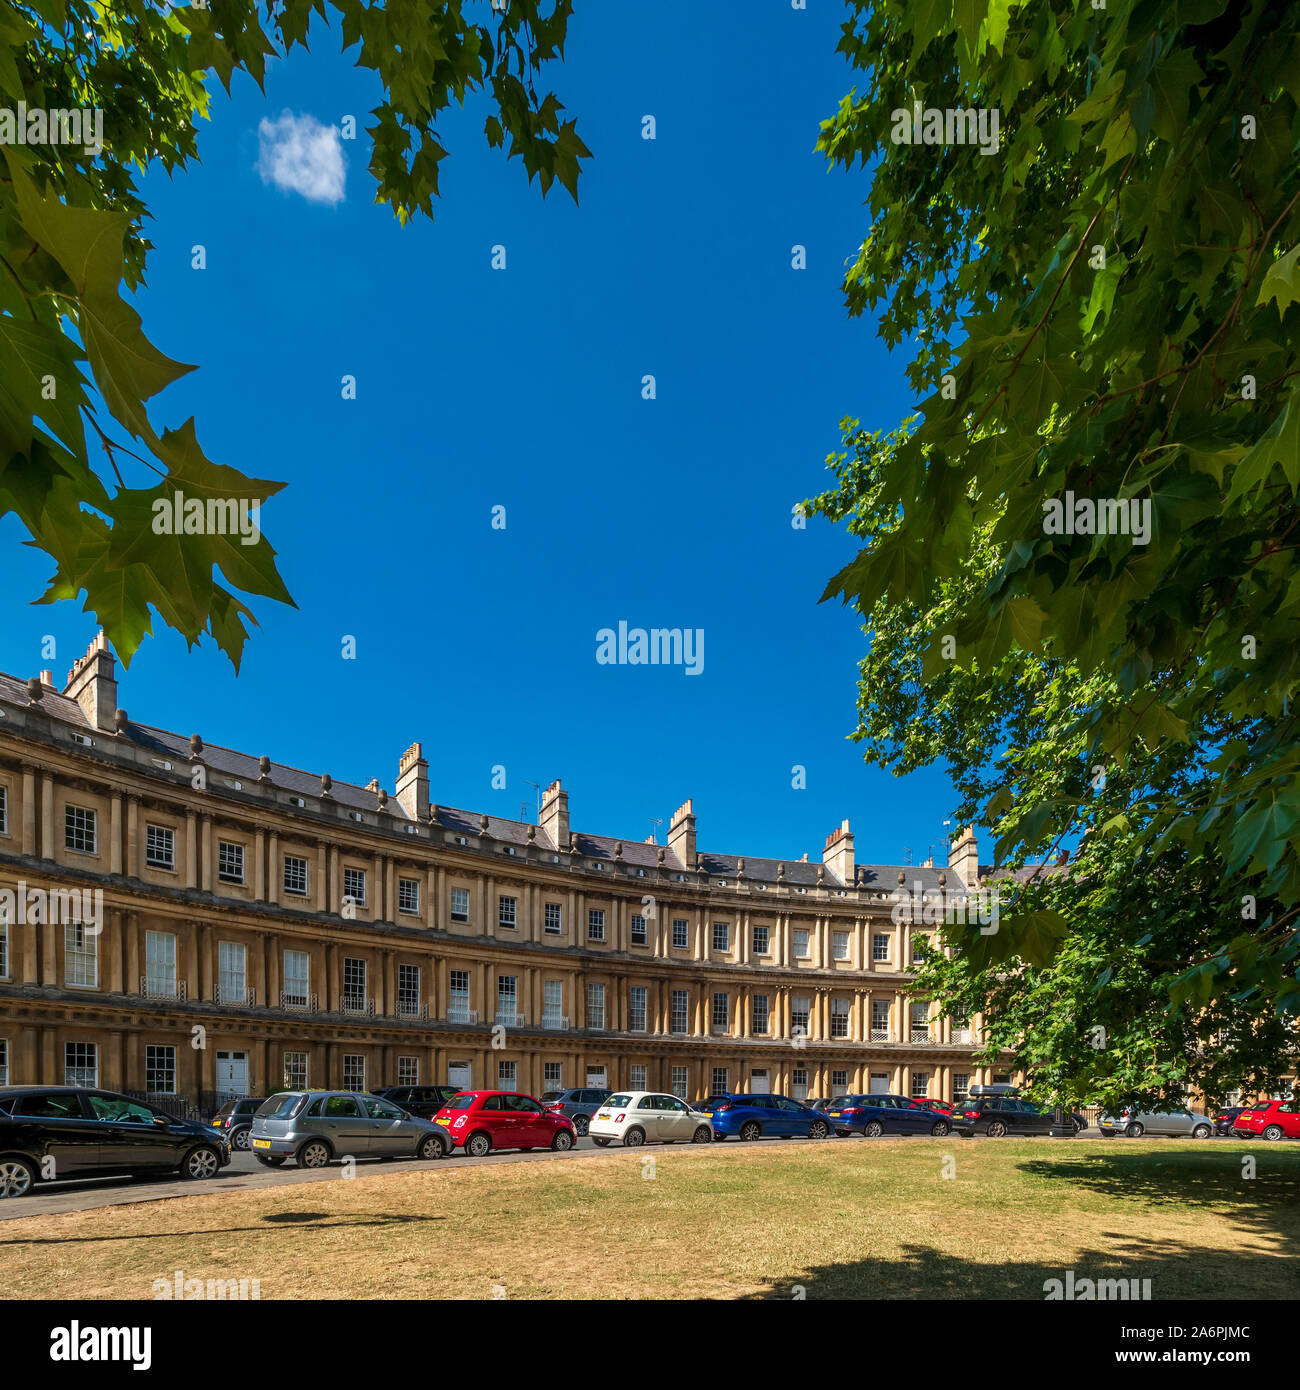 The Circus is a historic street of large townhouses in the city of Bath, forming a circle with three entrances. Designed by the architect John Wood. Stock Photo